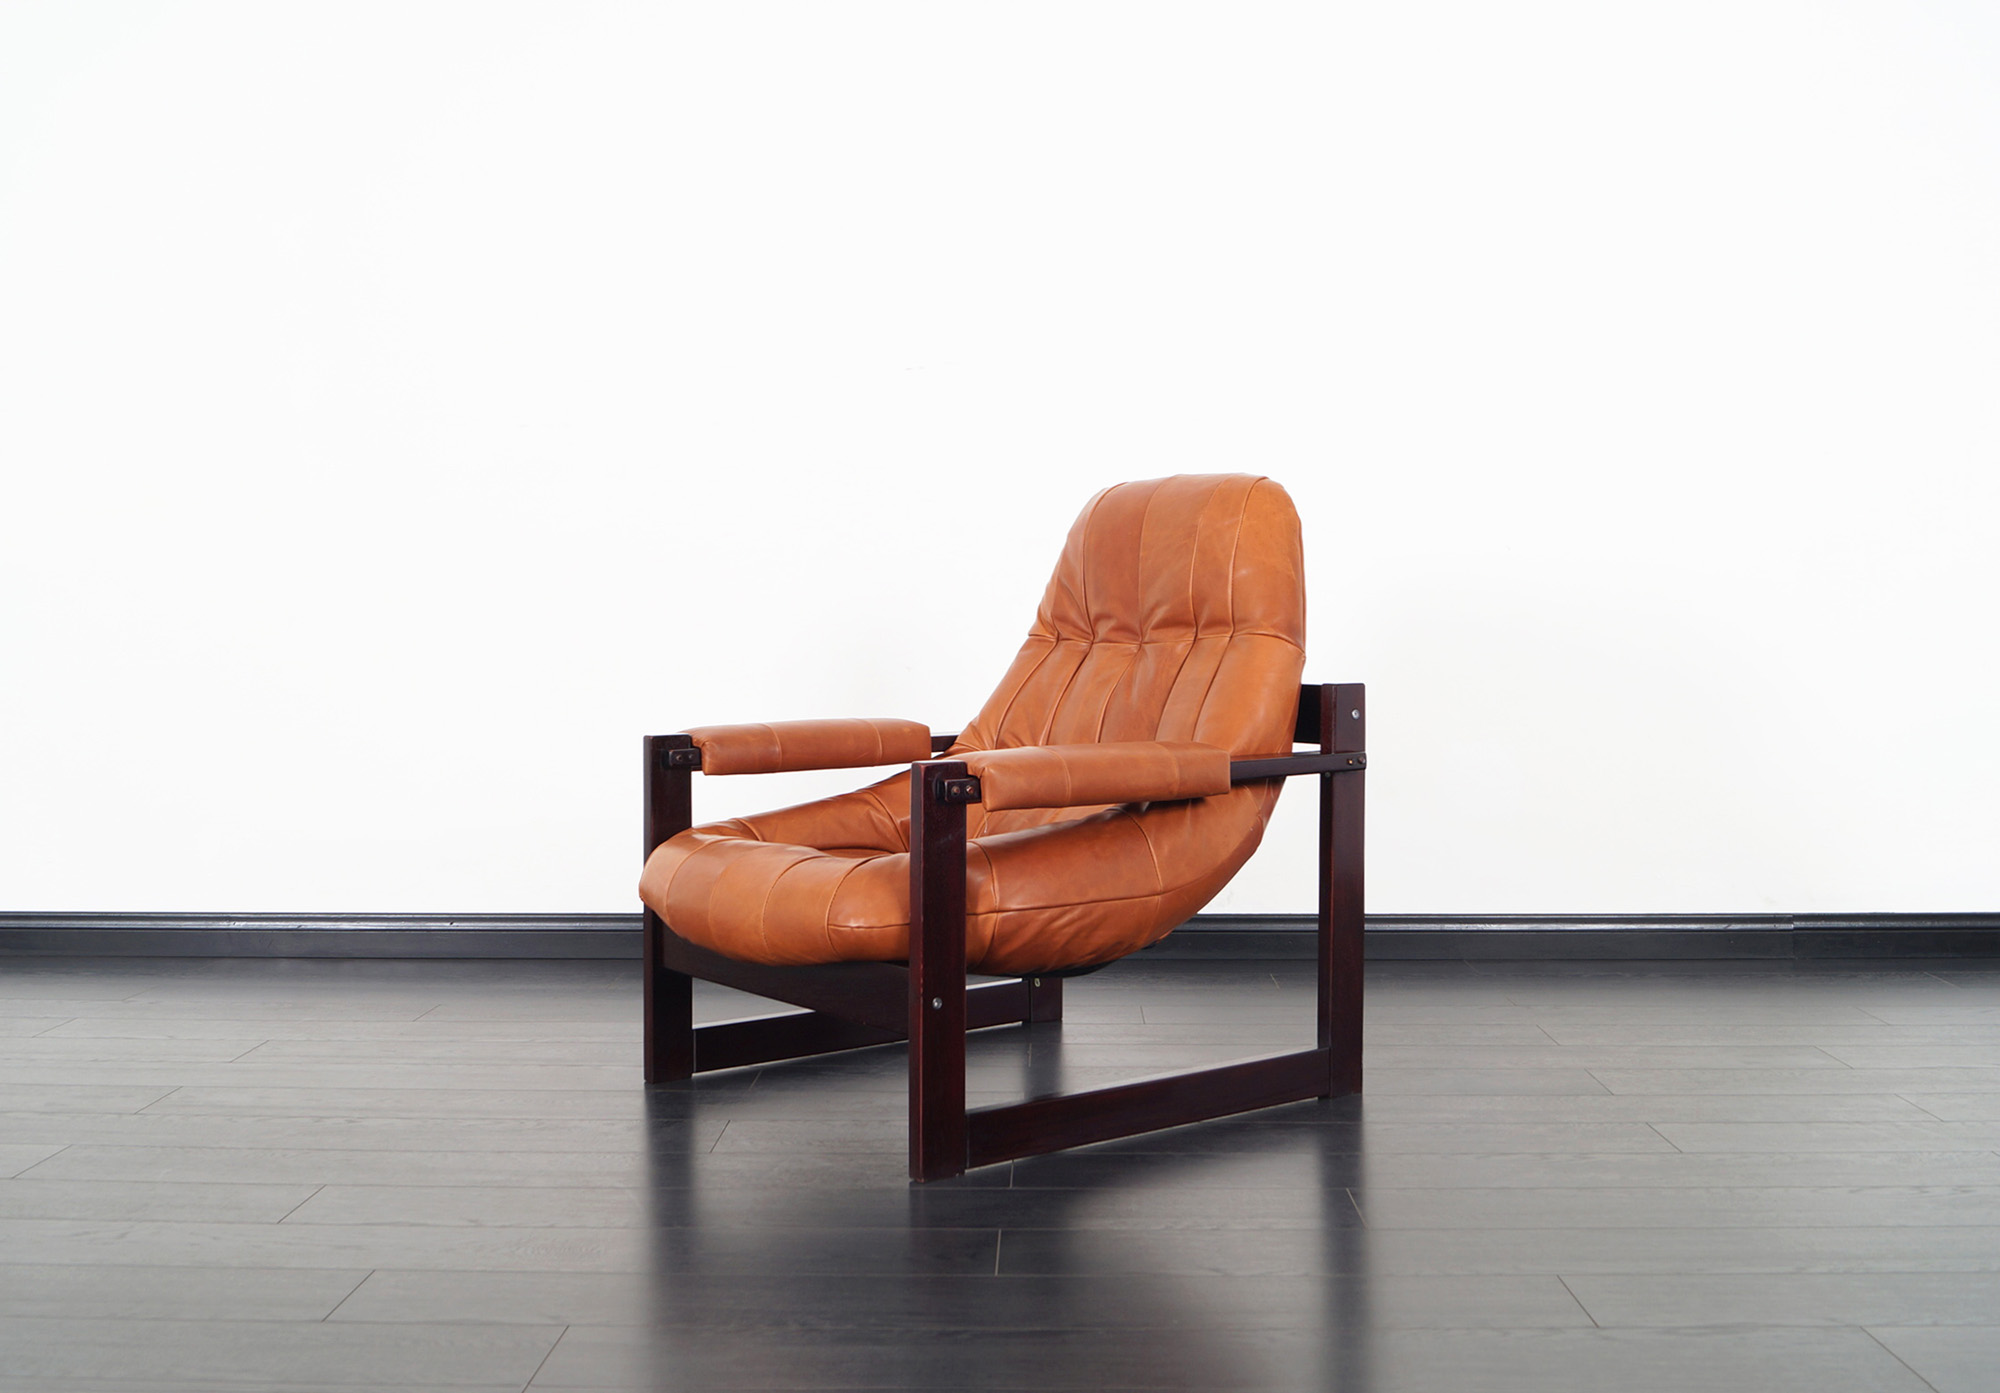 Brazilian Leather Lounge Chair and Ottoman by Percival Lafer